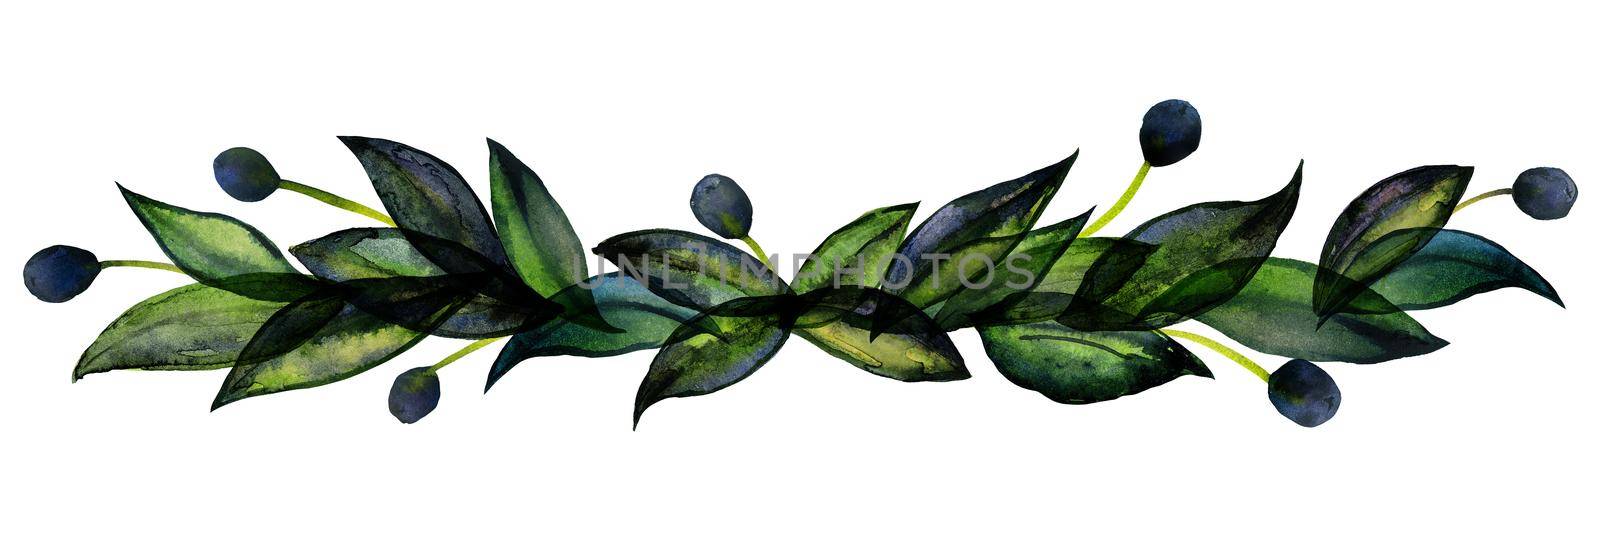 Olive floral botanical composition. Black and green watercolor bouquet. Cute decor for home and cafe textiles, for packaging decor and menu